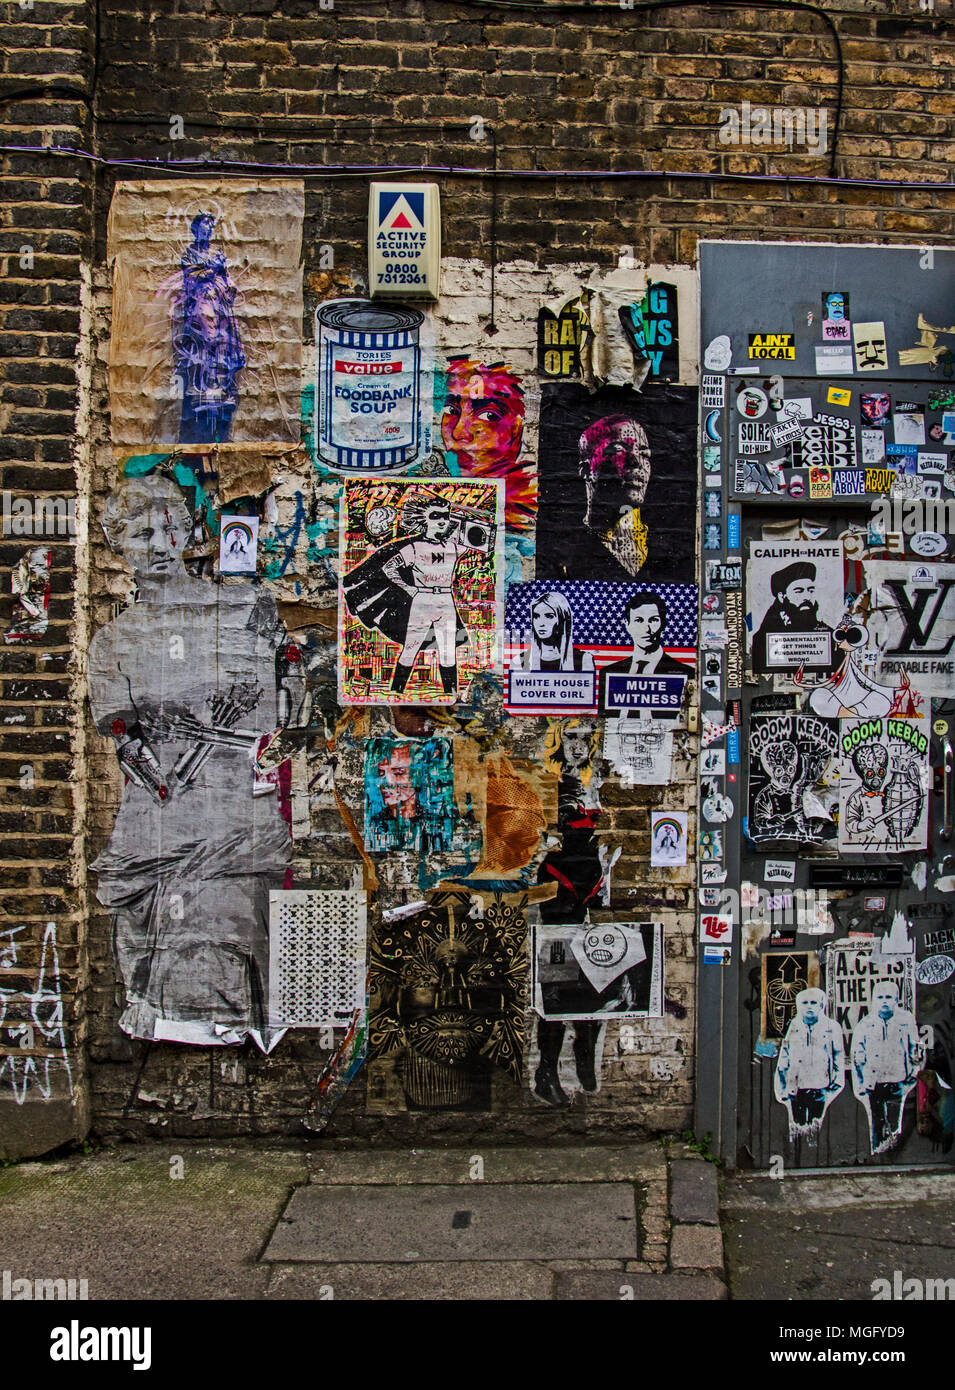 Alamy images street stock - Shoreditch art and photography hi-res